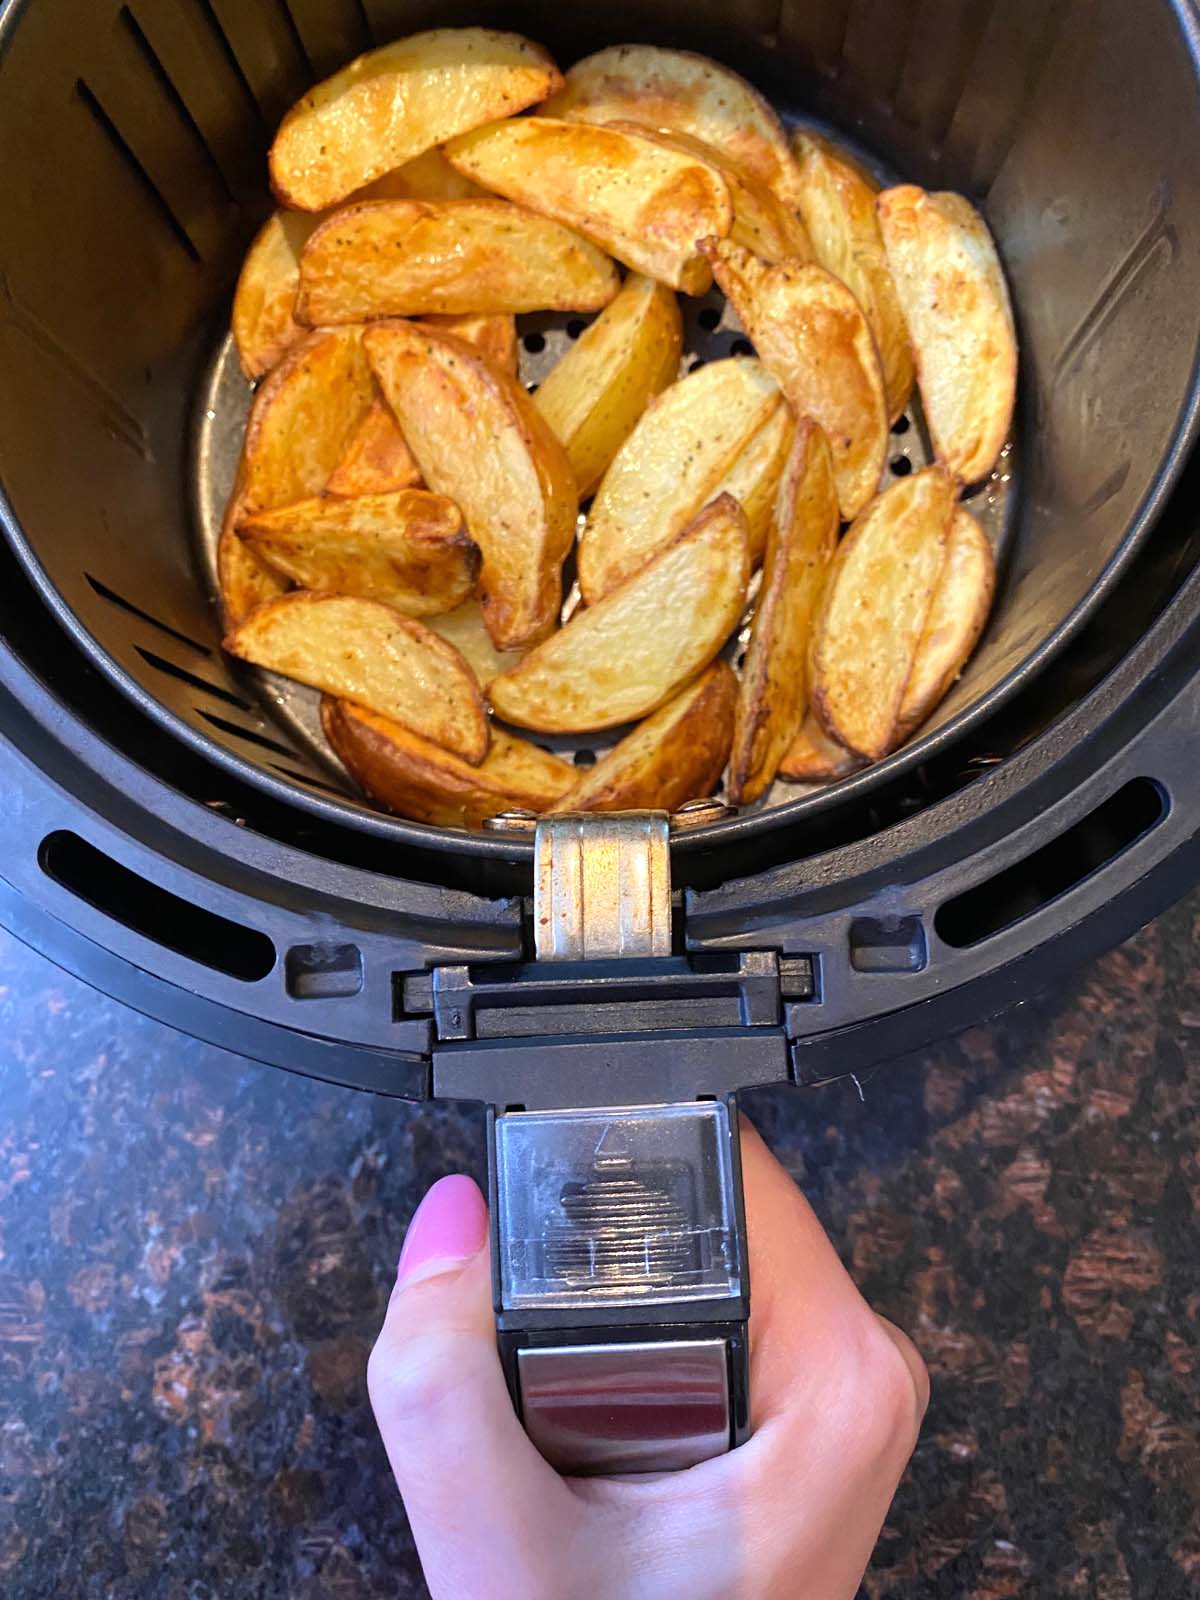 Cooked potato wedges in an air fryer.